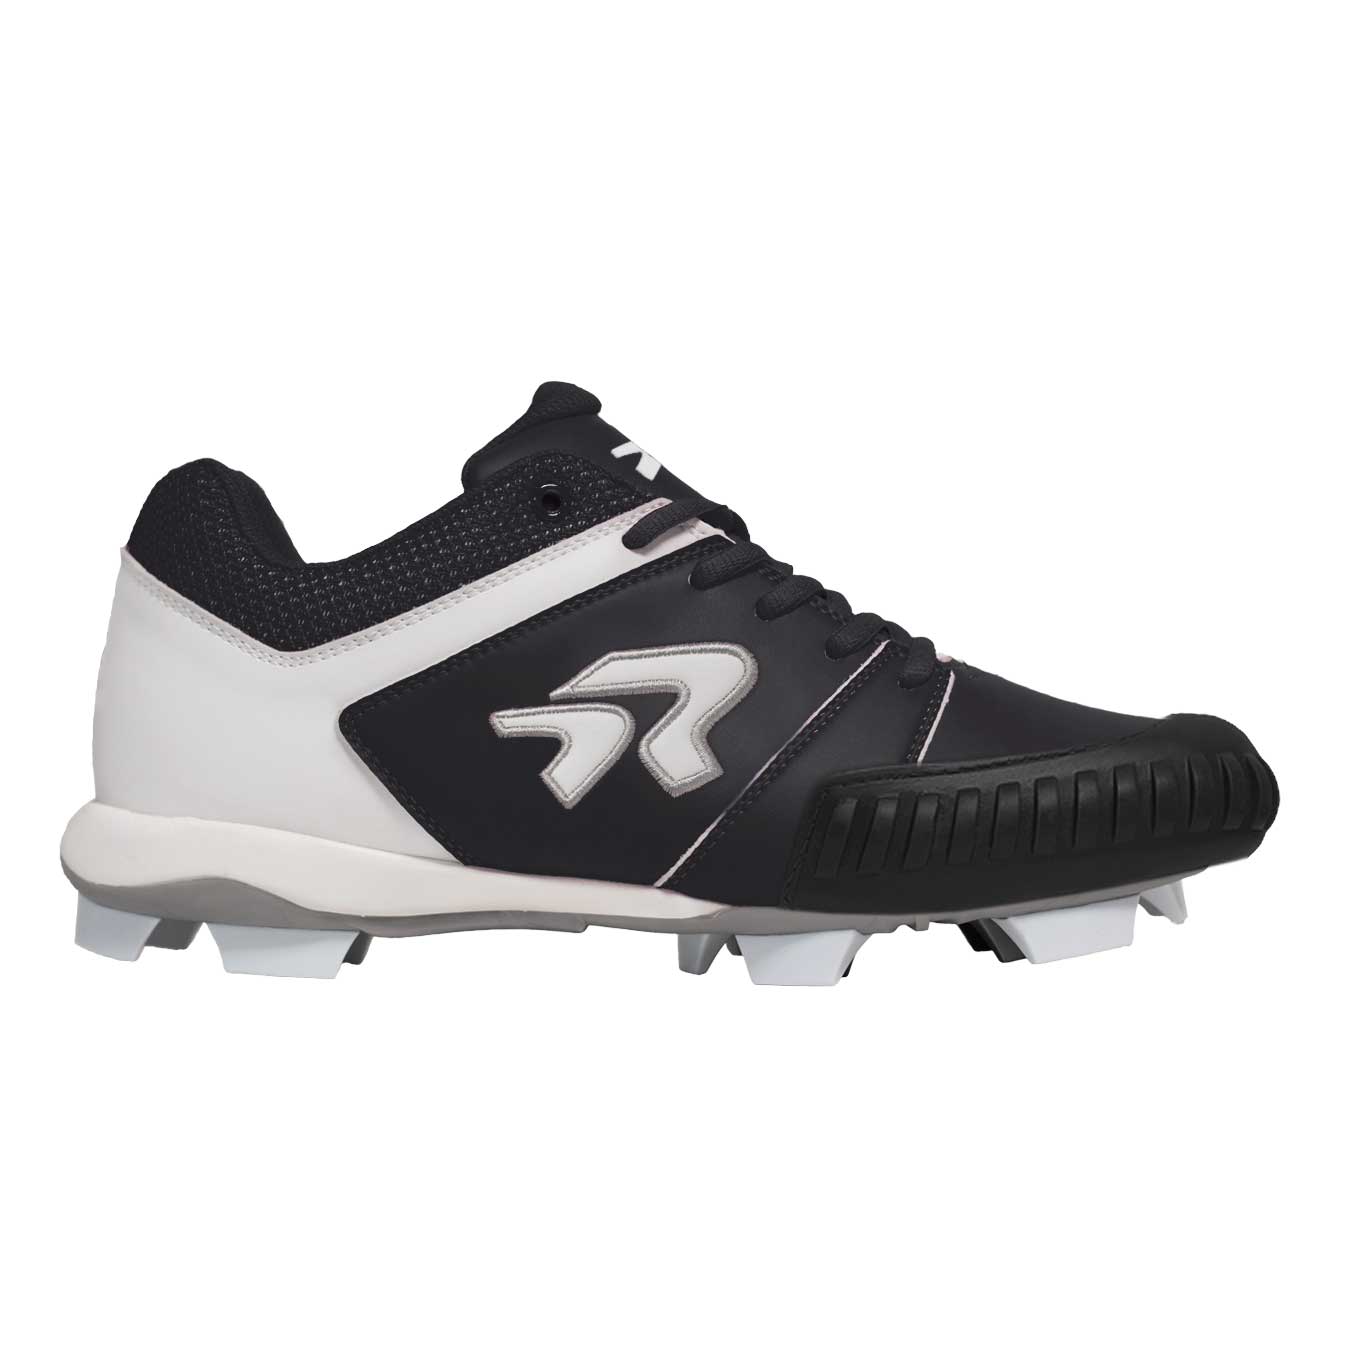 Ringor Flite CLEAT with Protective Toe